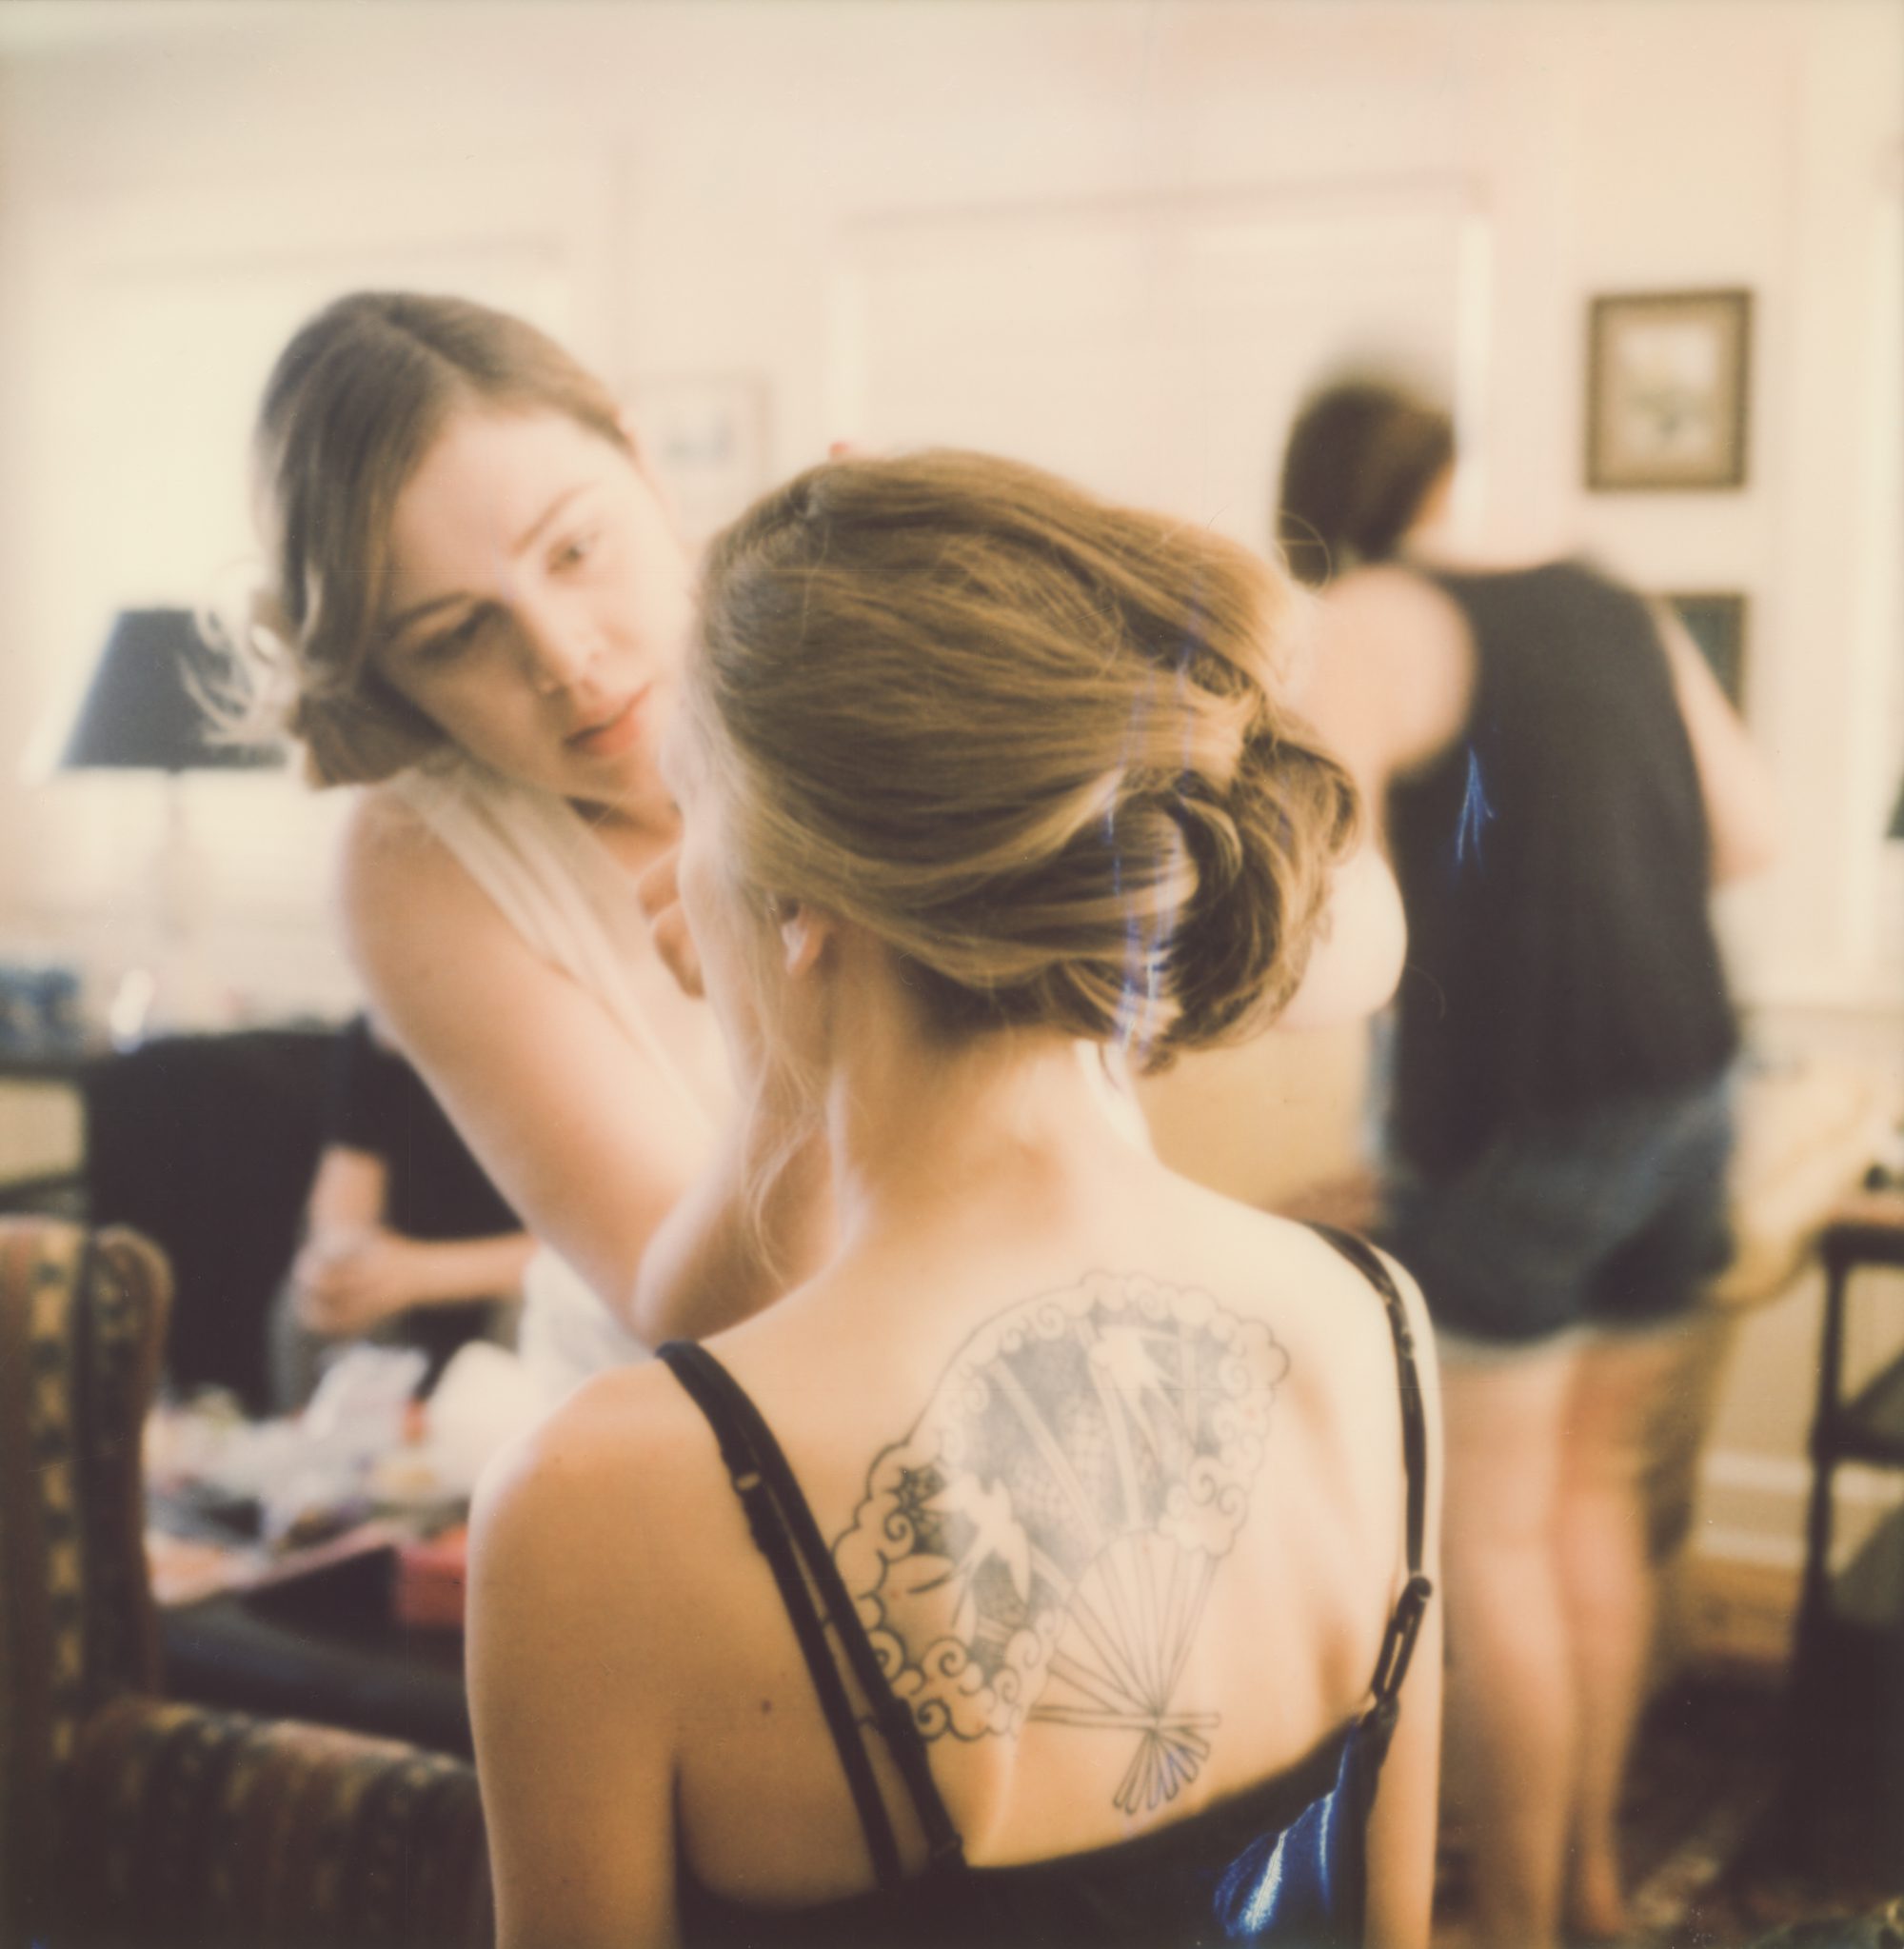 Polaroid portrait of the bride getting her makeup done. By wedding photographer Briana Morrison